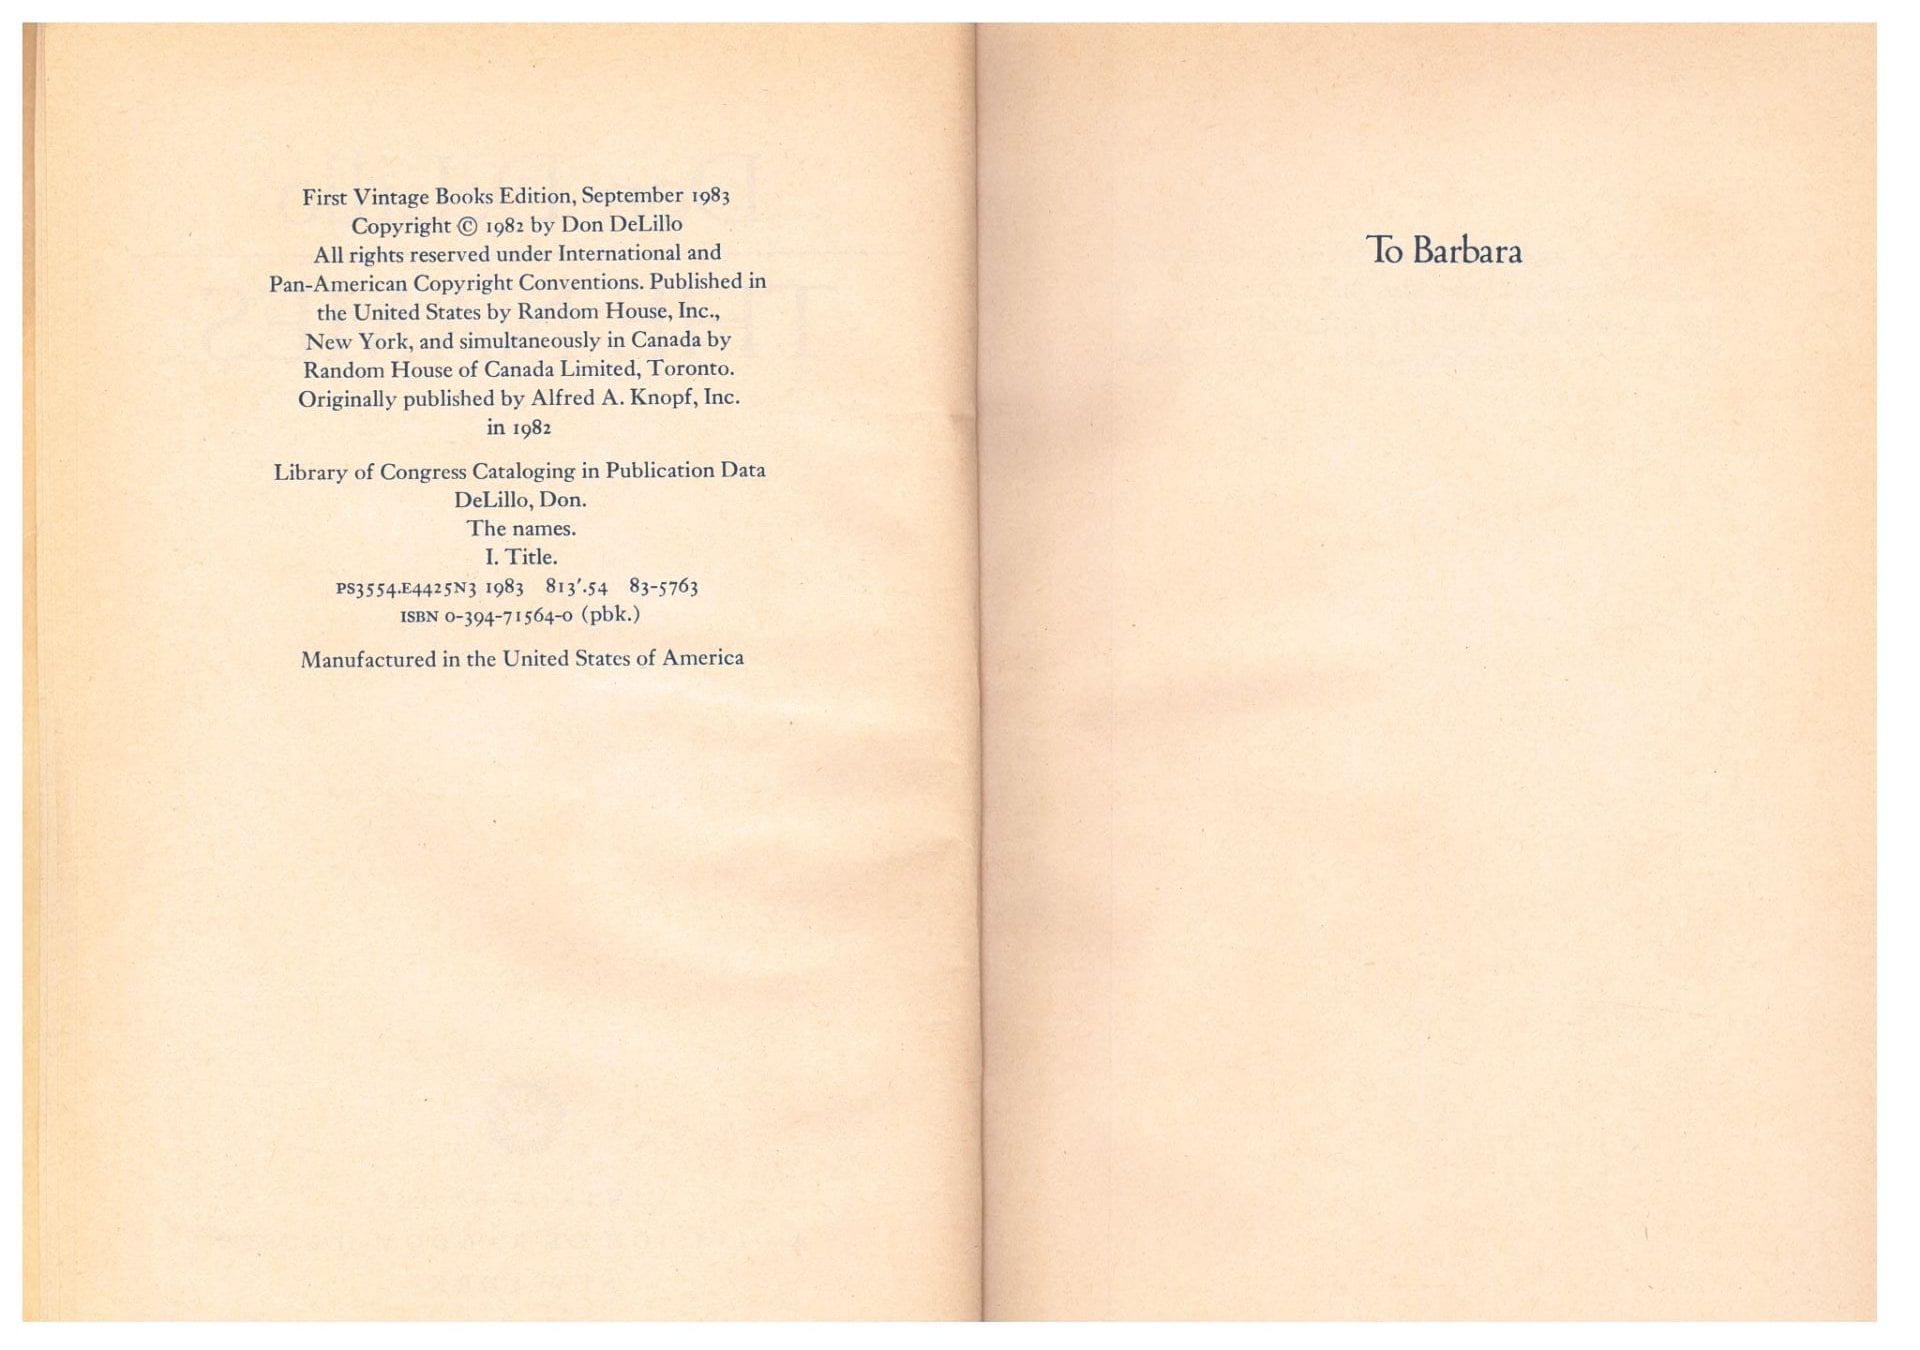 Publication information for the Names, from the first few pages of the book.